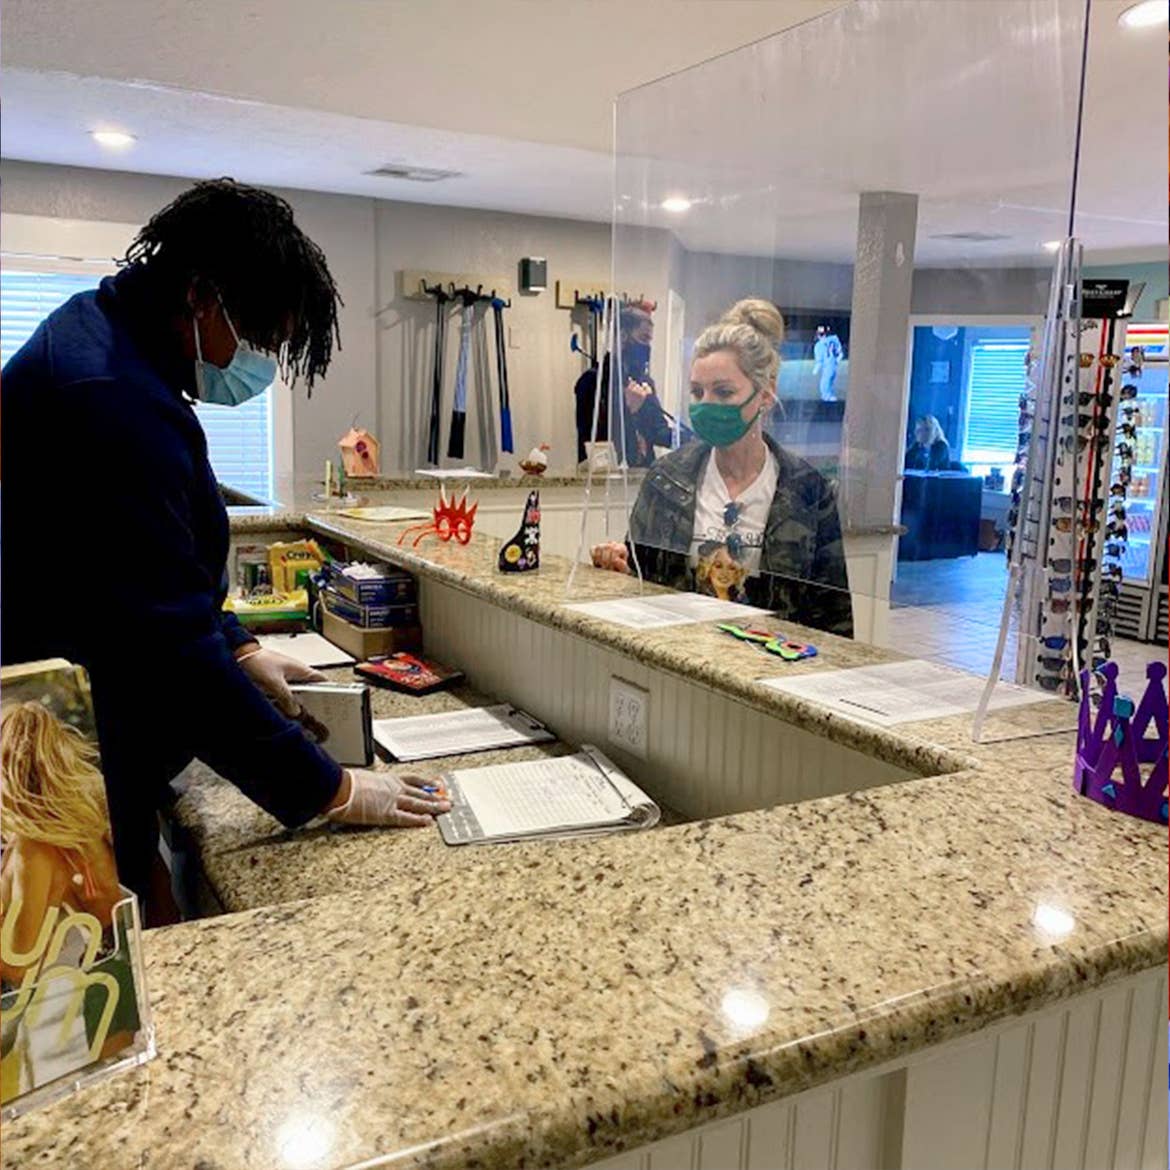 A Team Member assists Amanda with mini-golf equipment rentals while both wear a mask behind plexiglass at our Galveston Beach Resort.